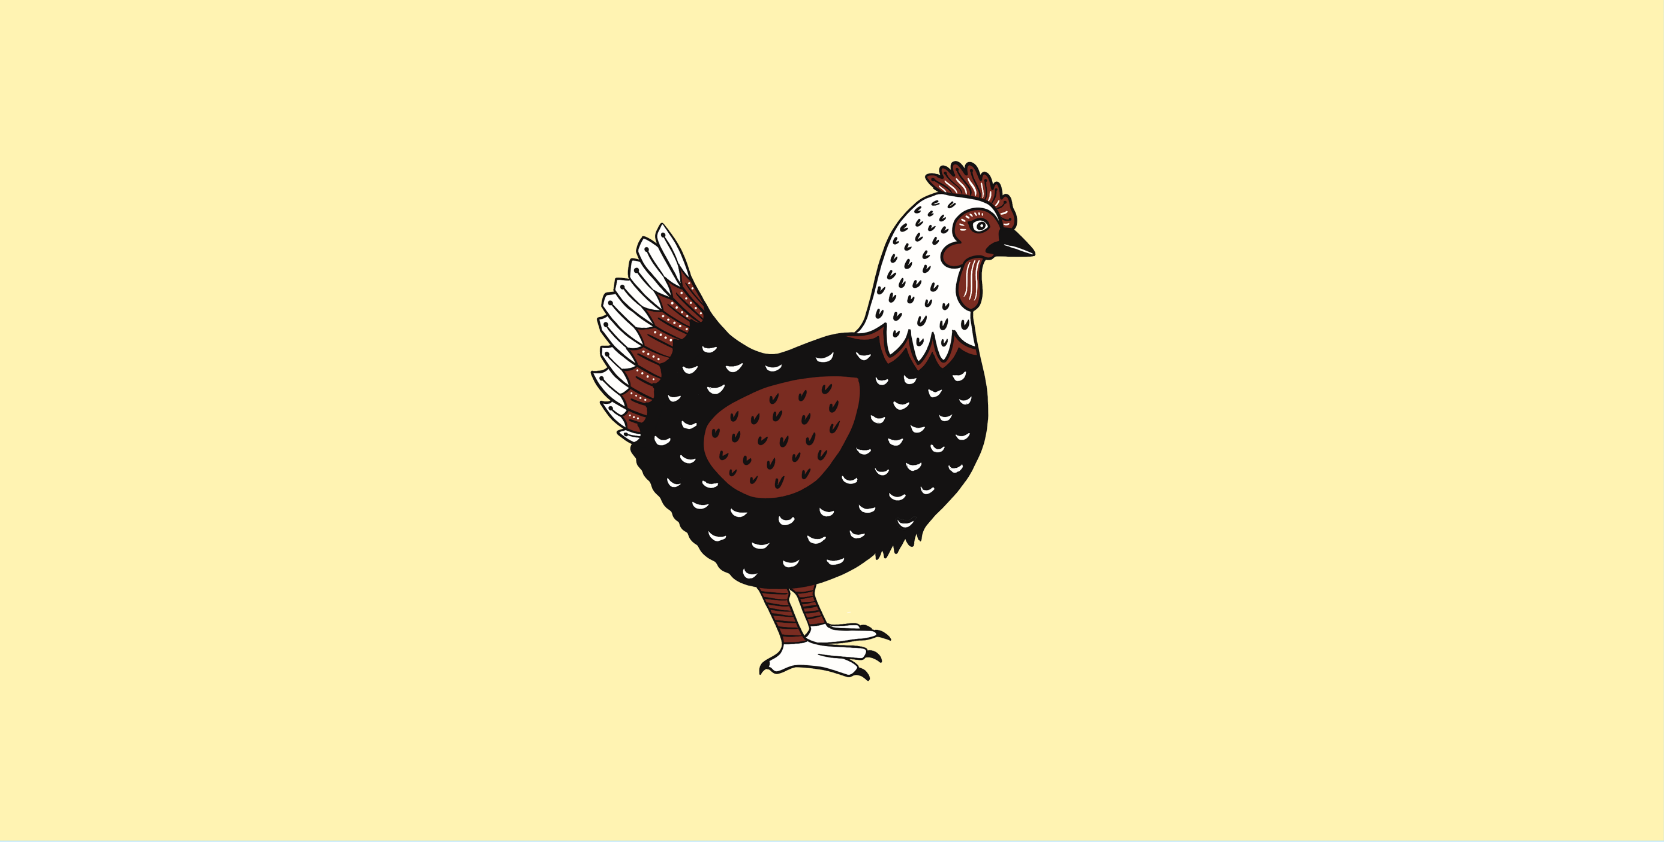 Hen illustration on a yellow background